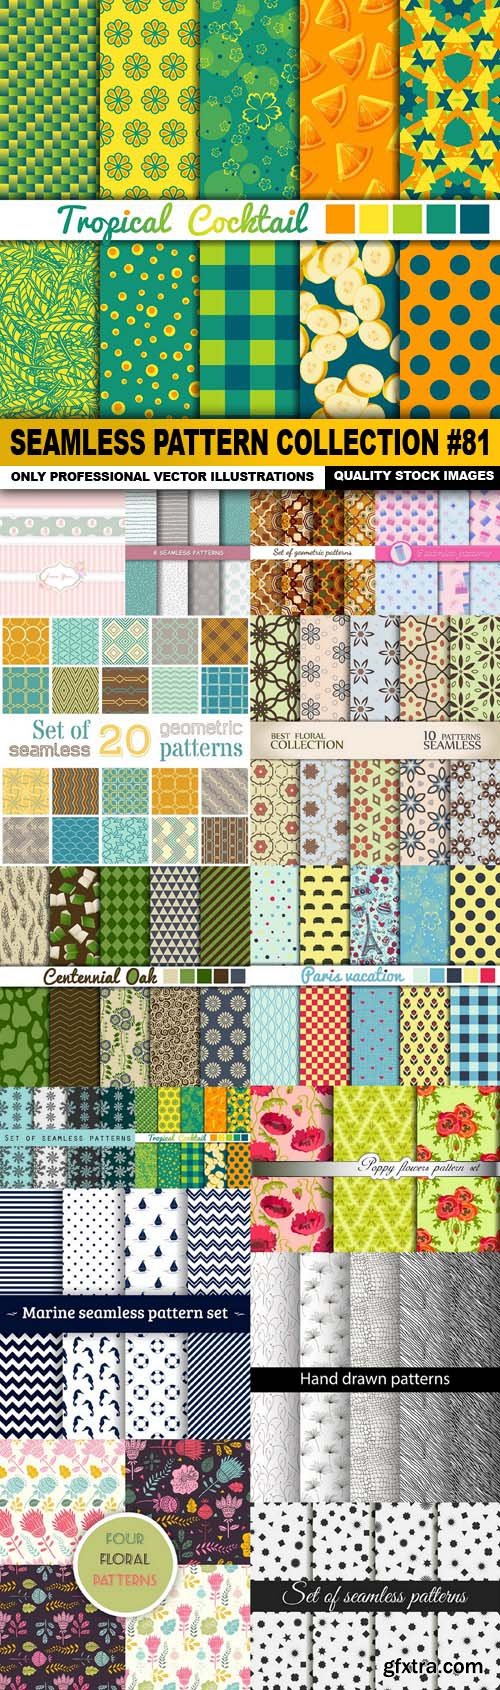 Seamless Pattern Collection #81 - 15 Vector